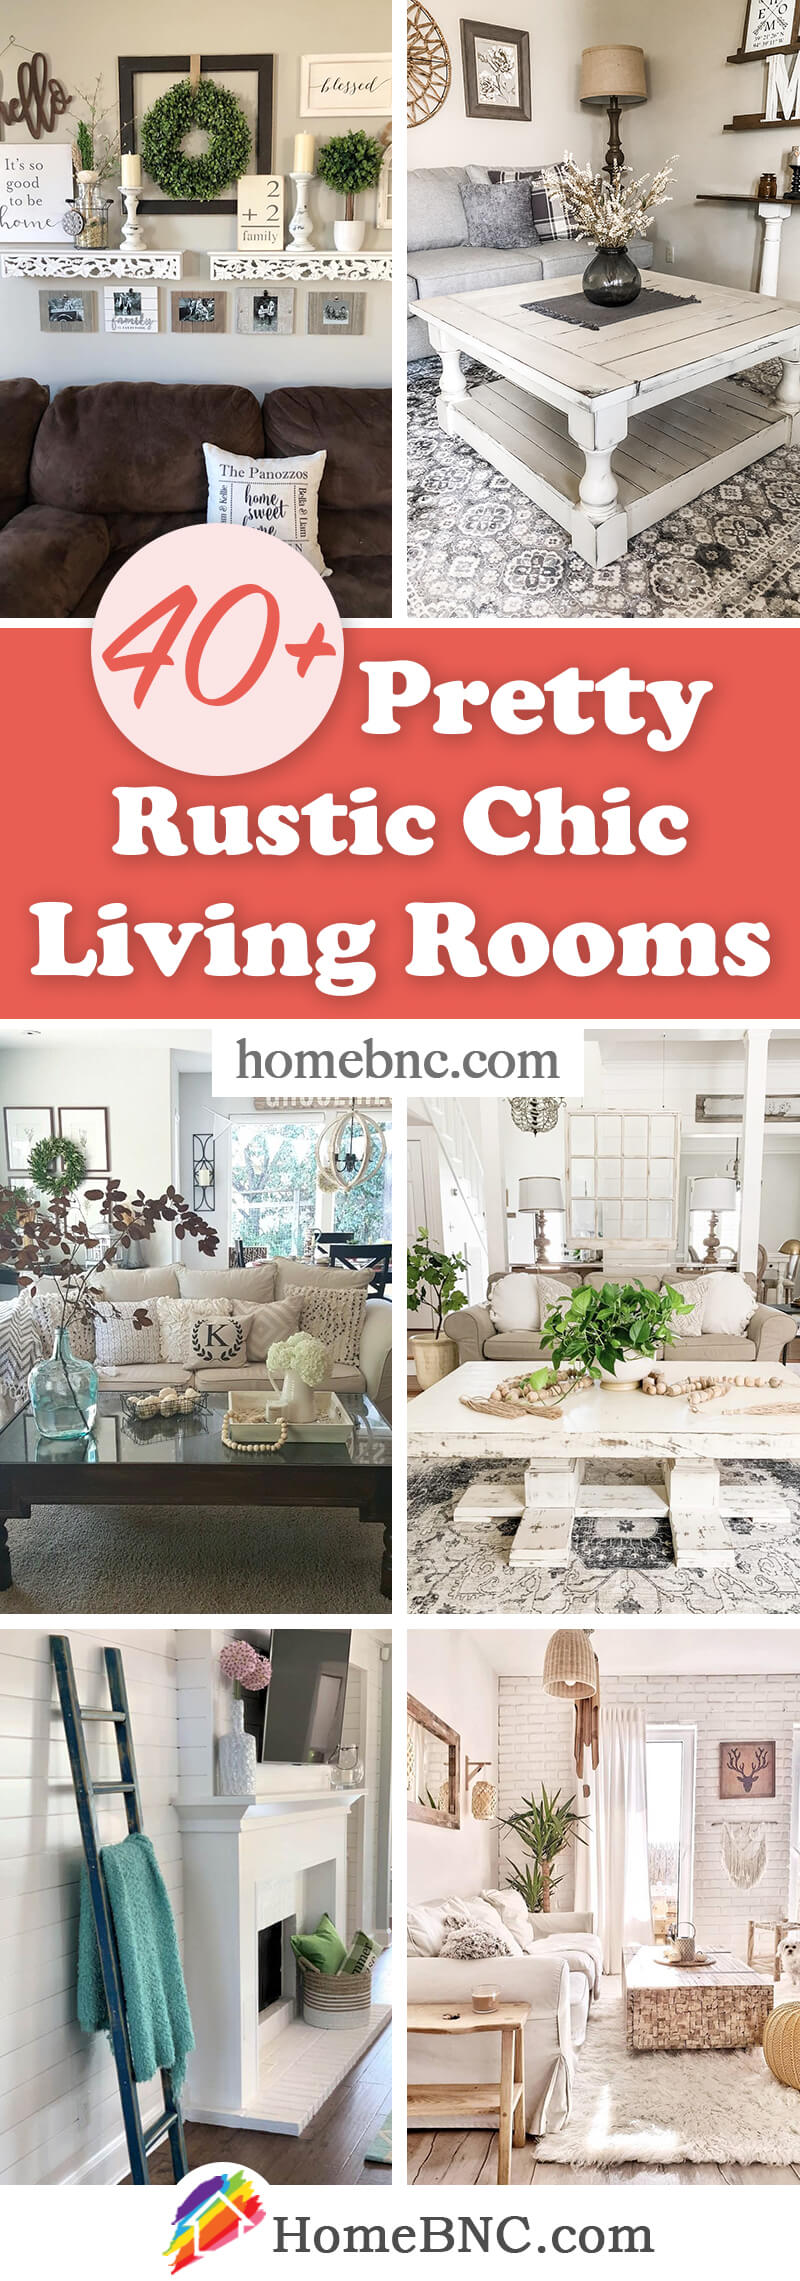 Rustic Chic Living Rooms